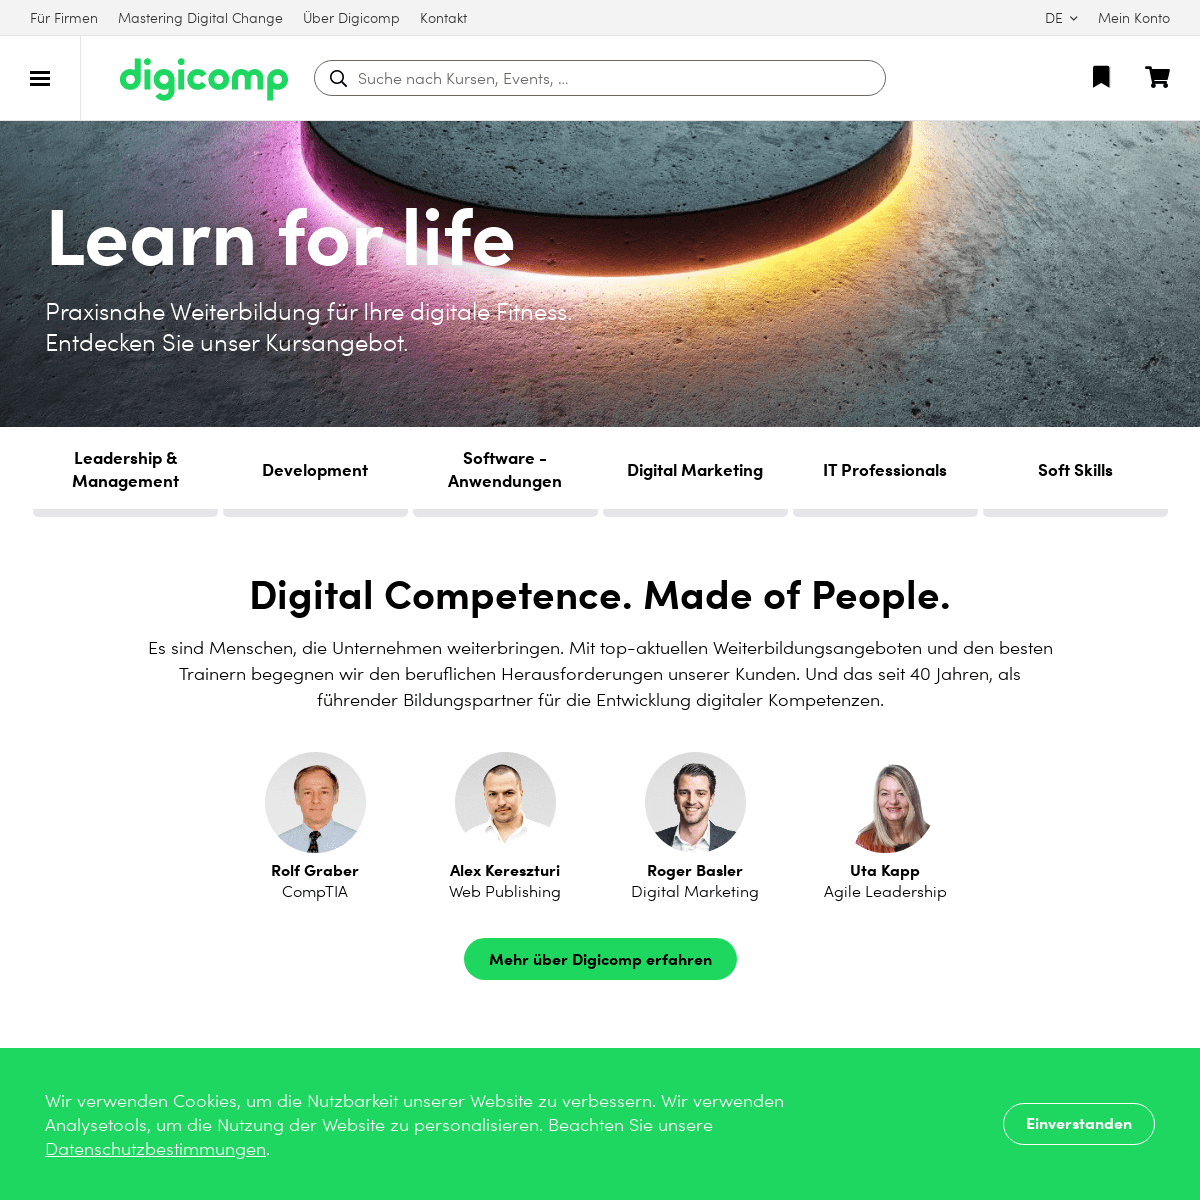 Digicomp - Digital Competence. Made of People